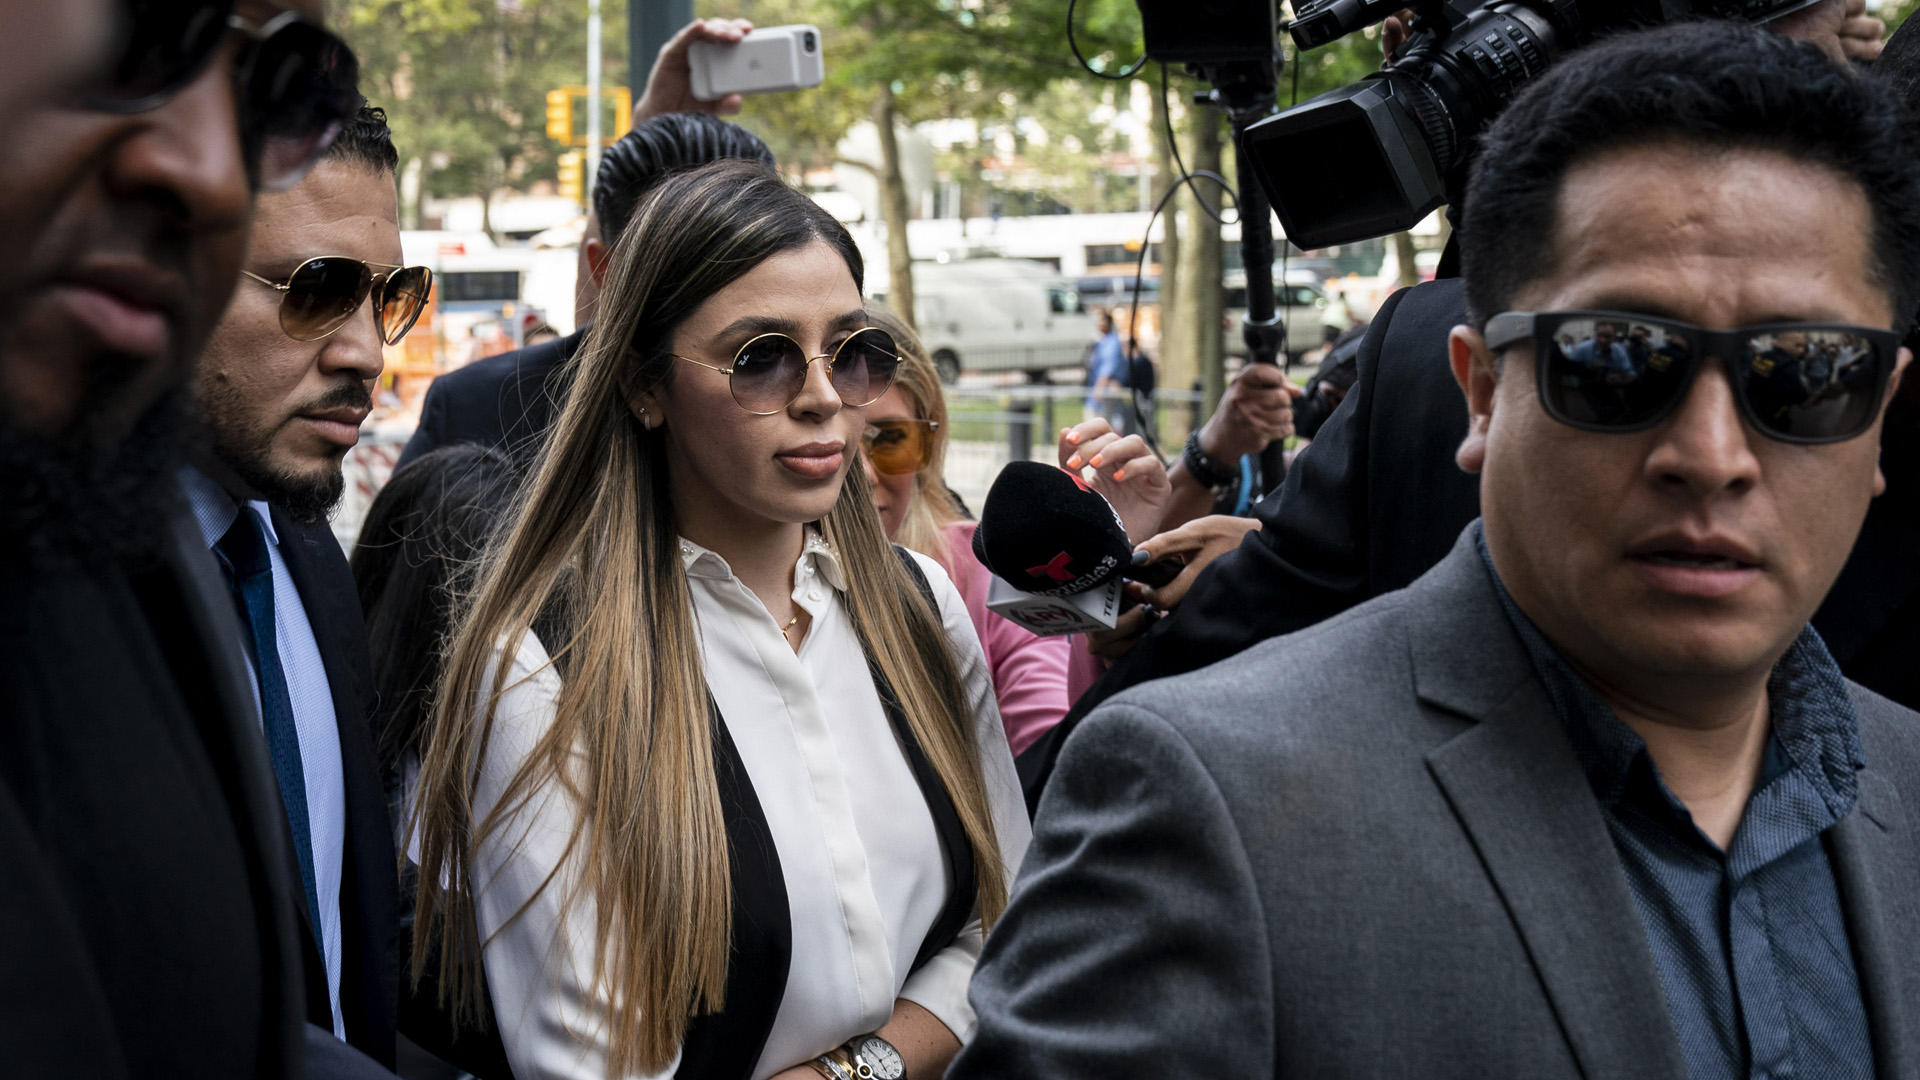 The US court reduced the sentence of Emma Coronel, wife of "El Chapo" Guzmán who had pleaded guilty to conspiring to traffic drugs, launder money and participate in financial business with the Sinaloa cartel (DEF File)